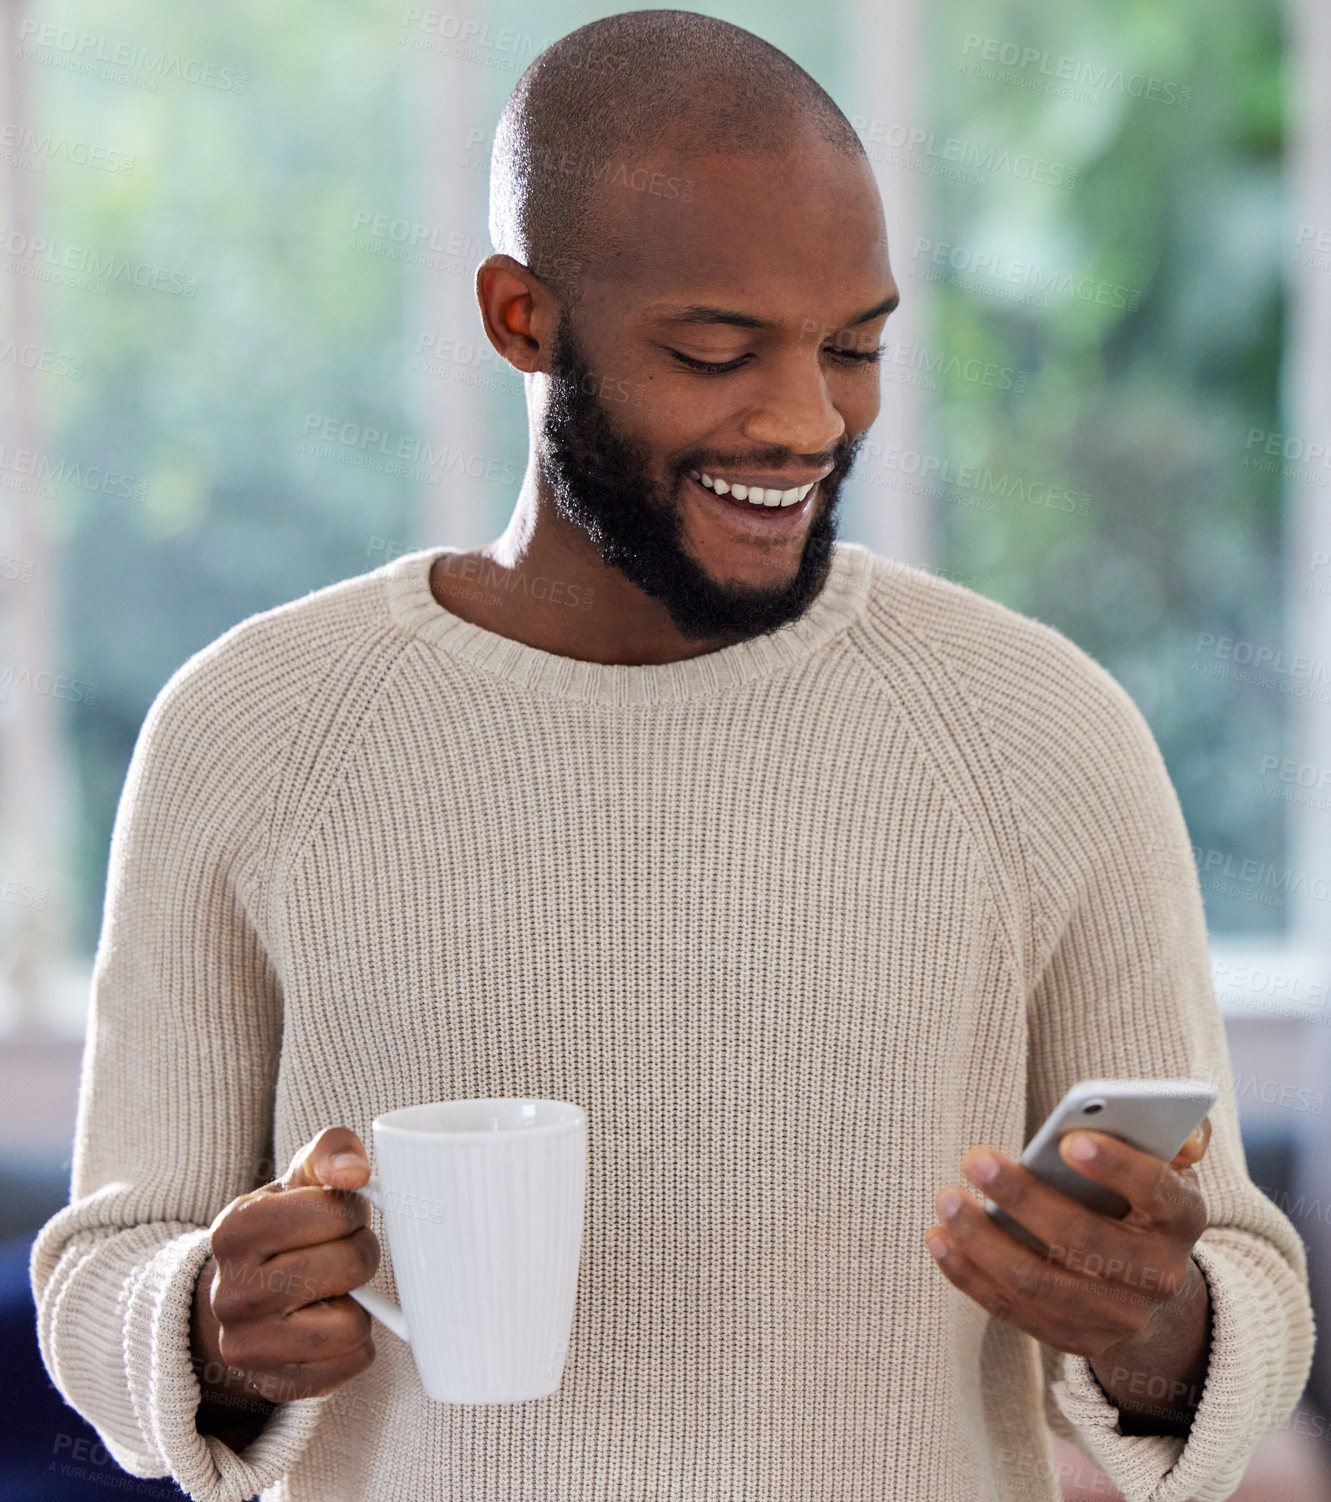 Buy stock photo Shot of a young man drinking coffee while using a phone at home